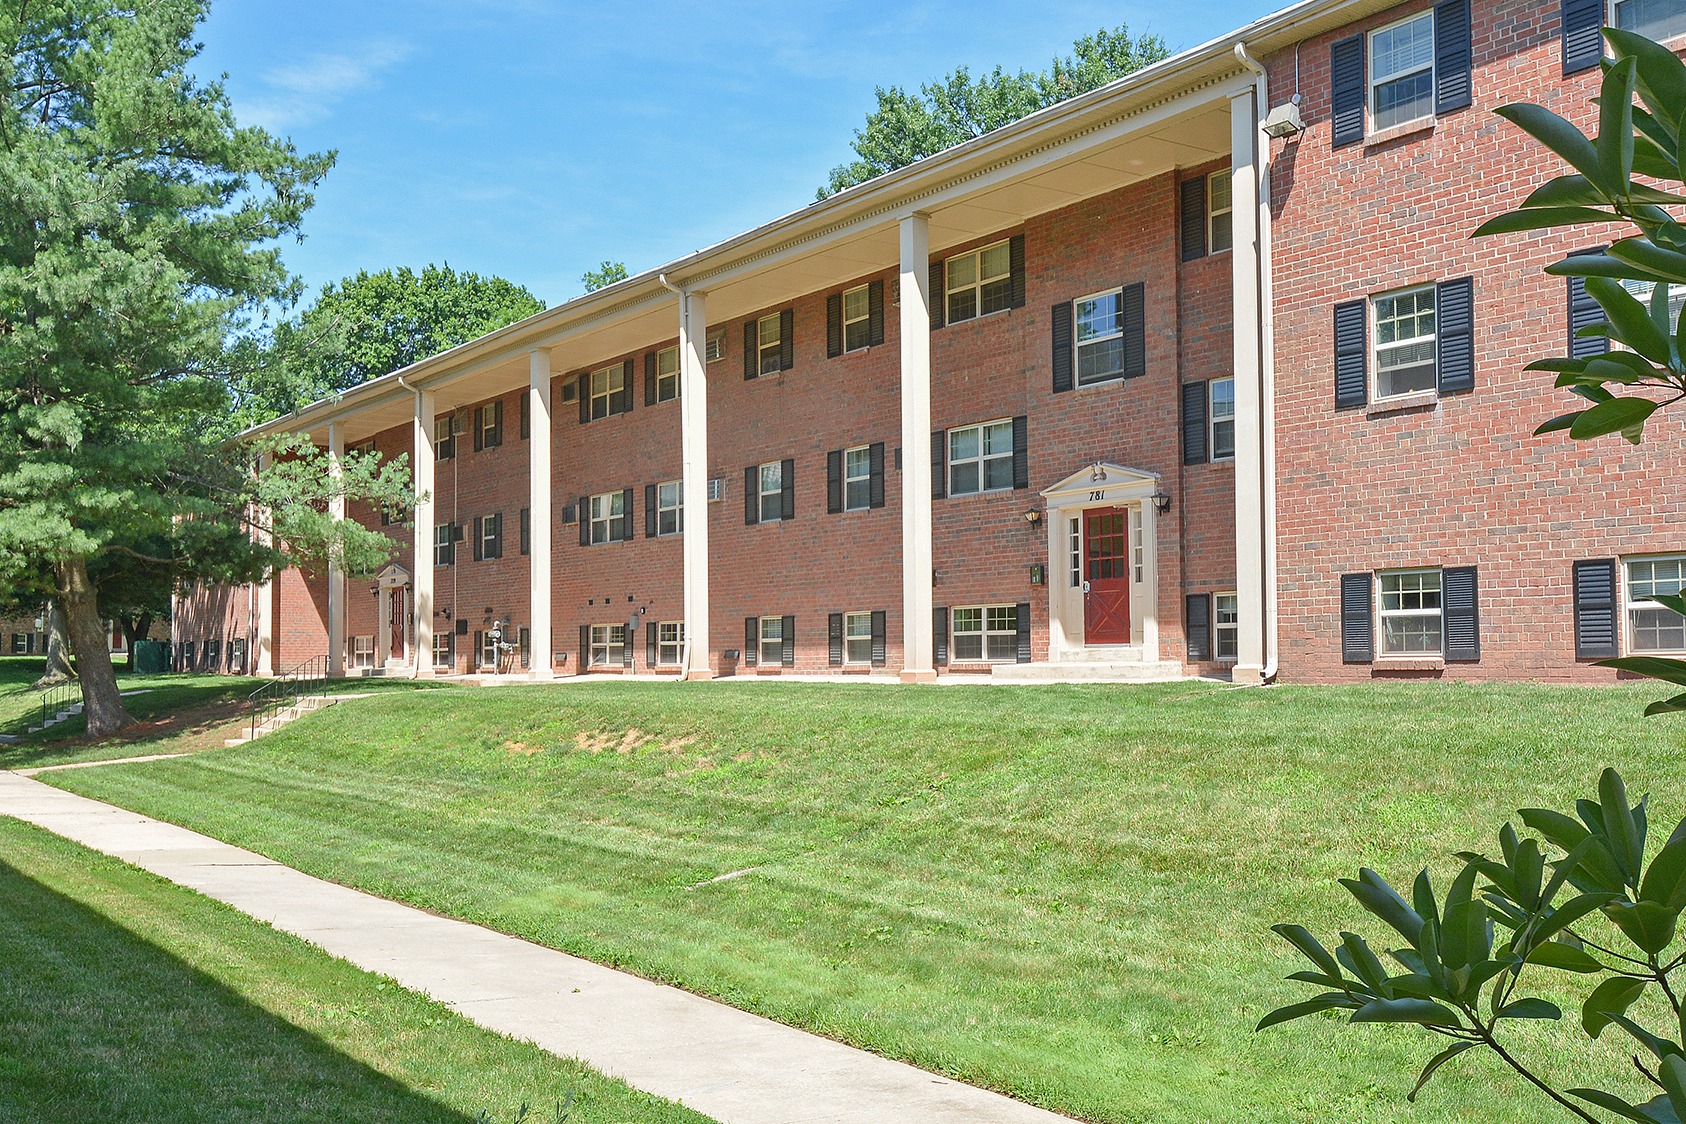 Exterior of Naamans Village Apartments with large grassy areas and sidewalks.